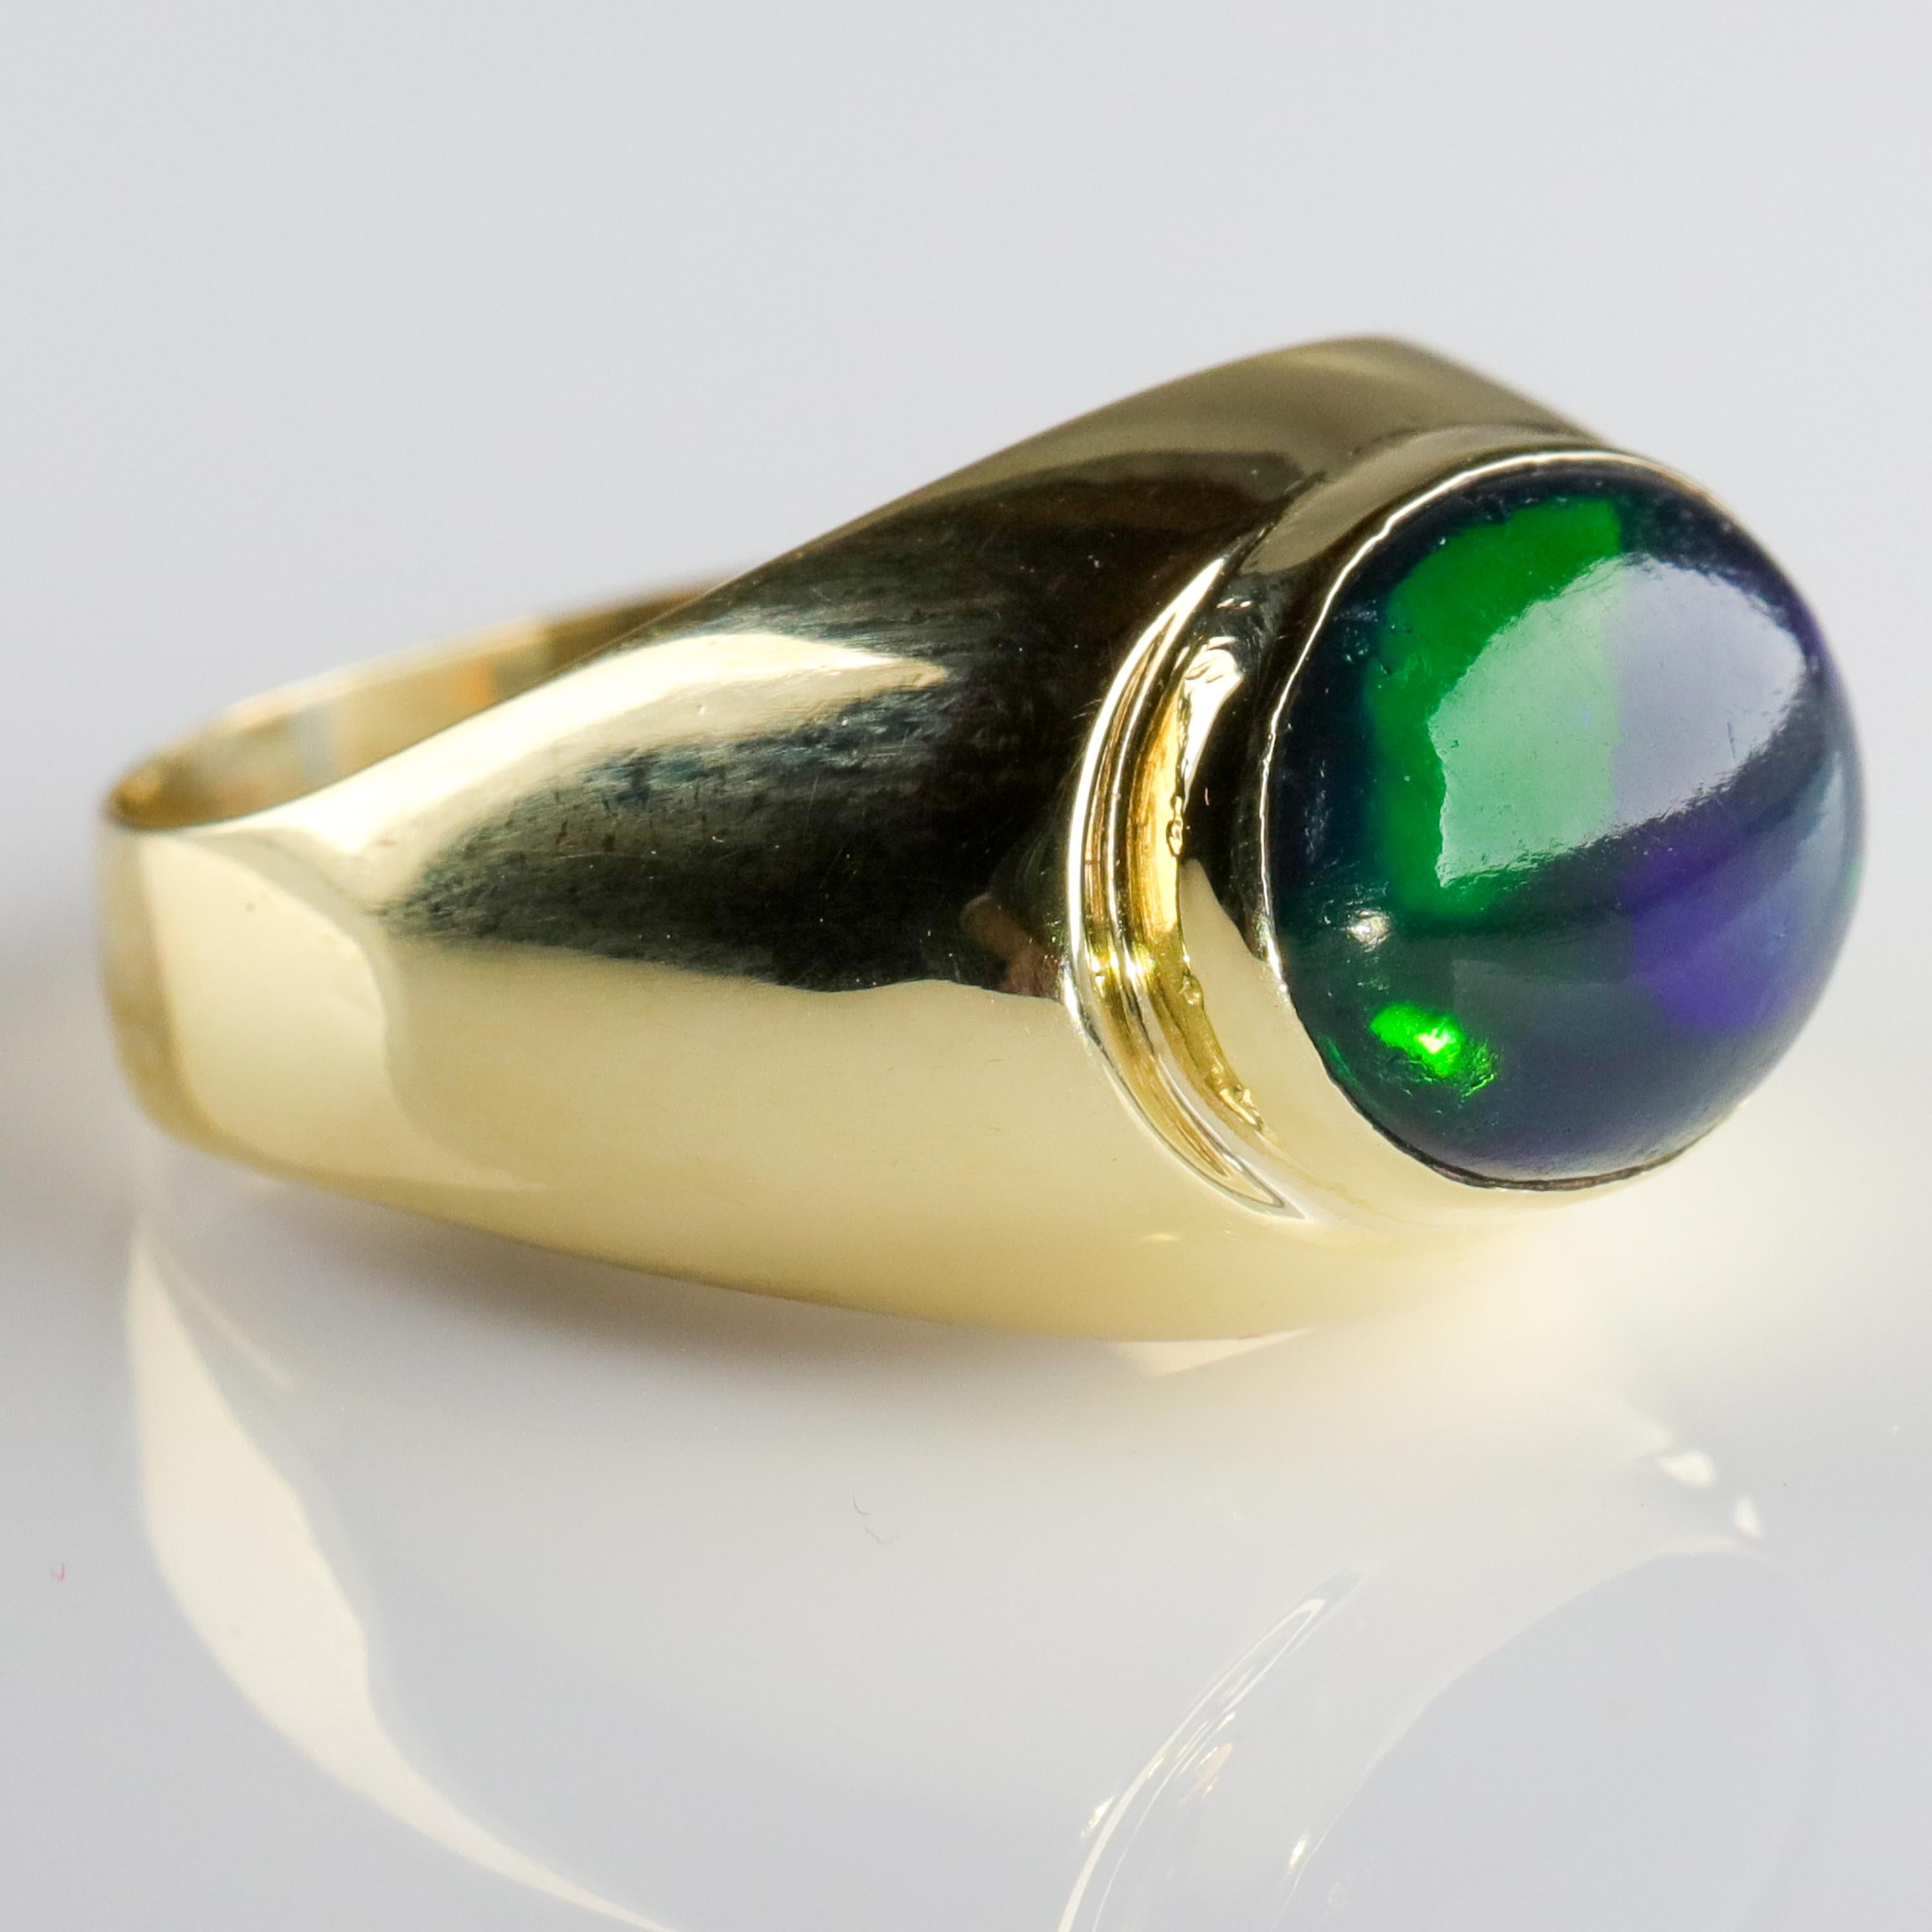 Black Opal Ring from Lightning Ridge is Understated Until It's Not 4